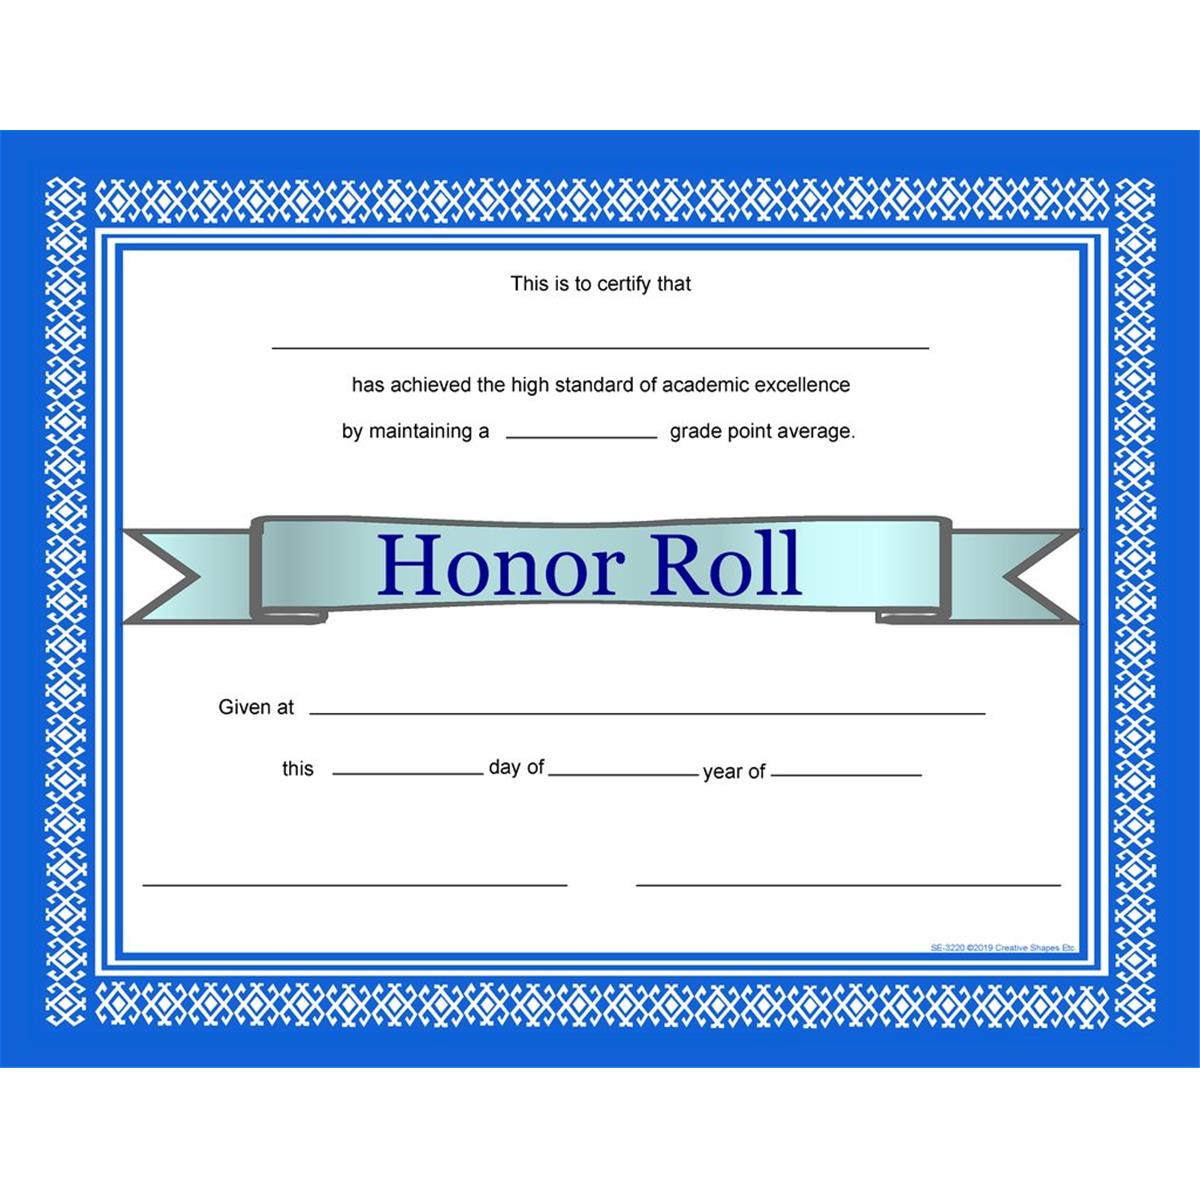 Picture of Creative Shapes Etc SE-3220 8.5 x 11 in. Honor Roll Certificate - 30 Sheets per Pack